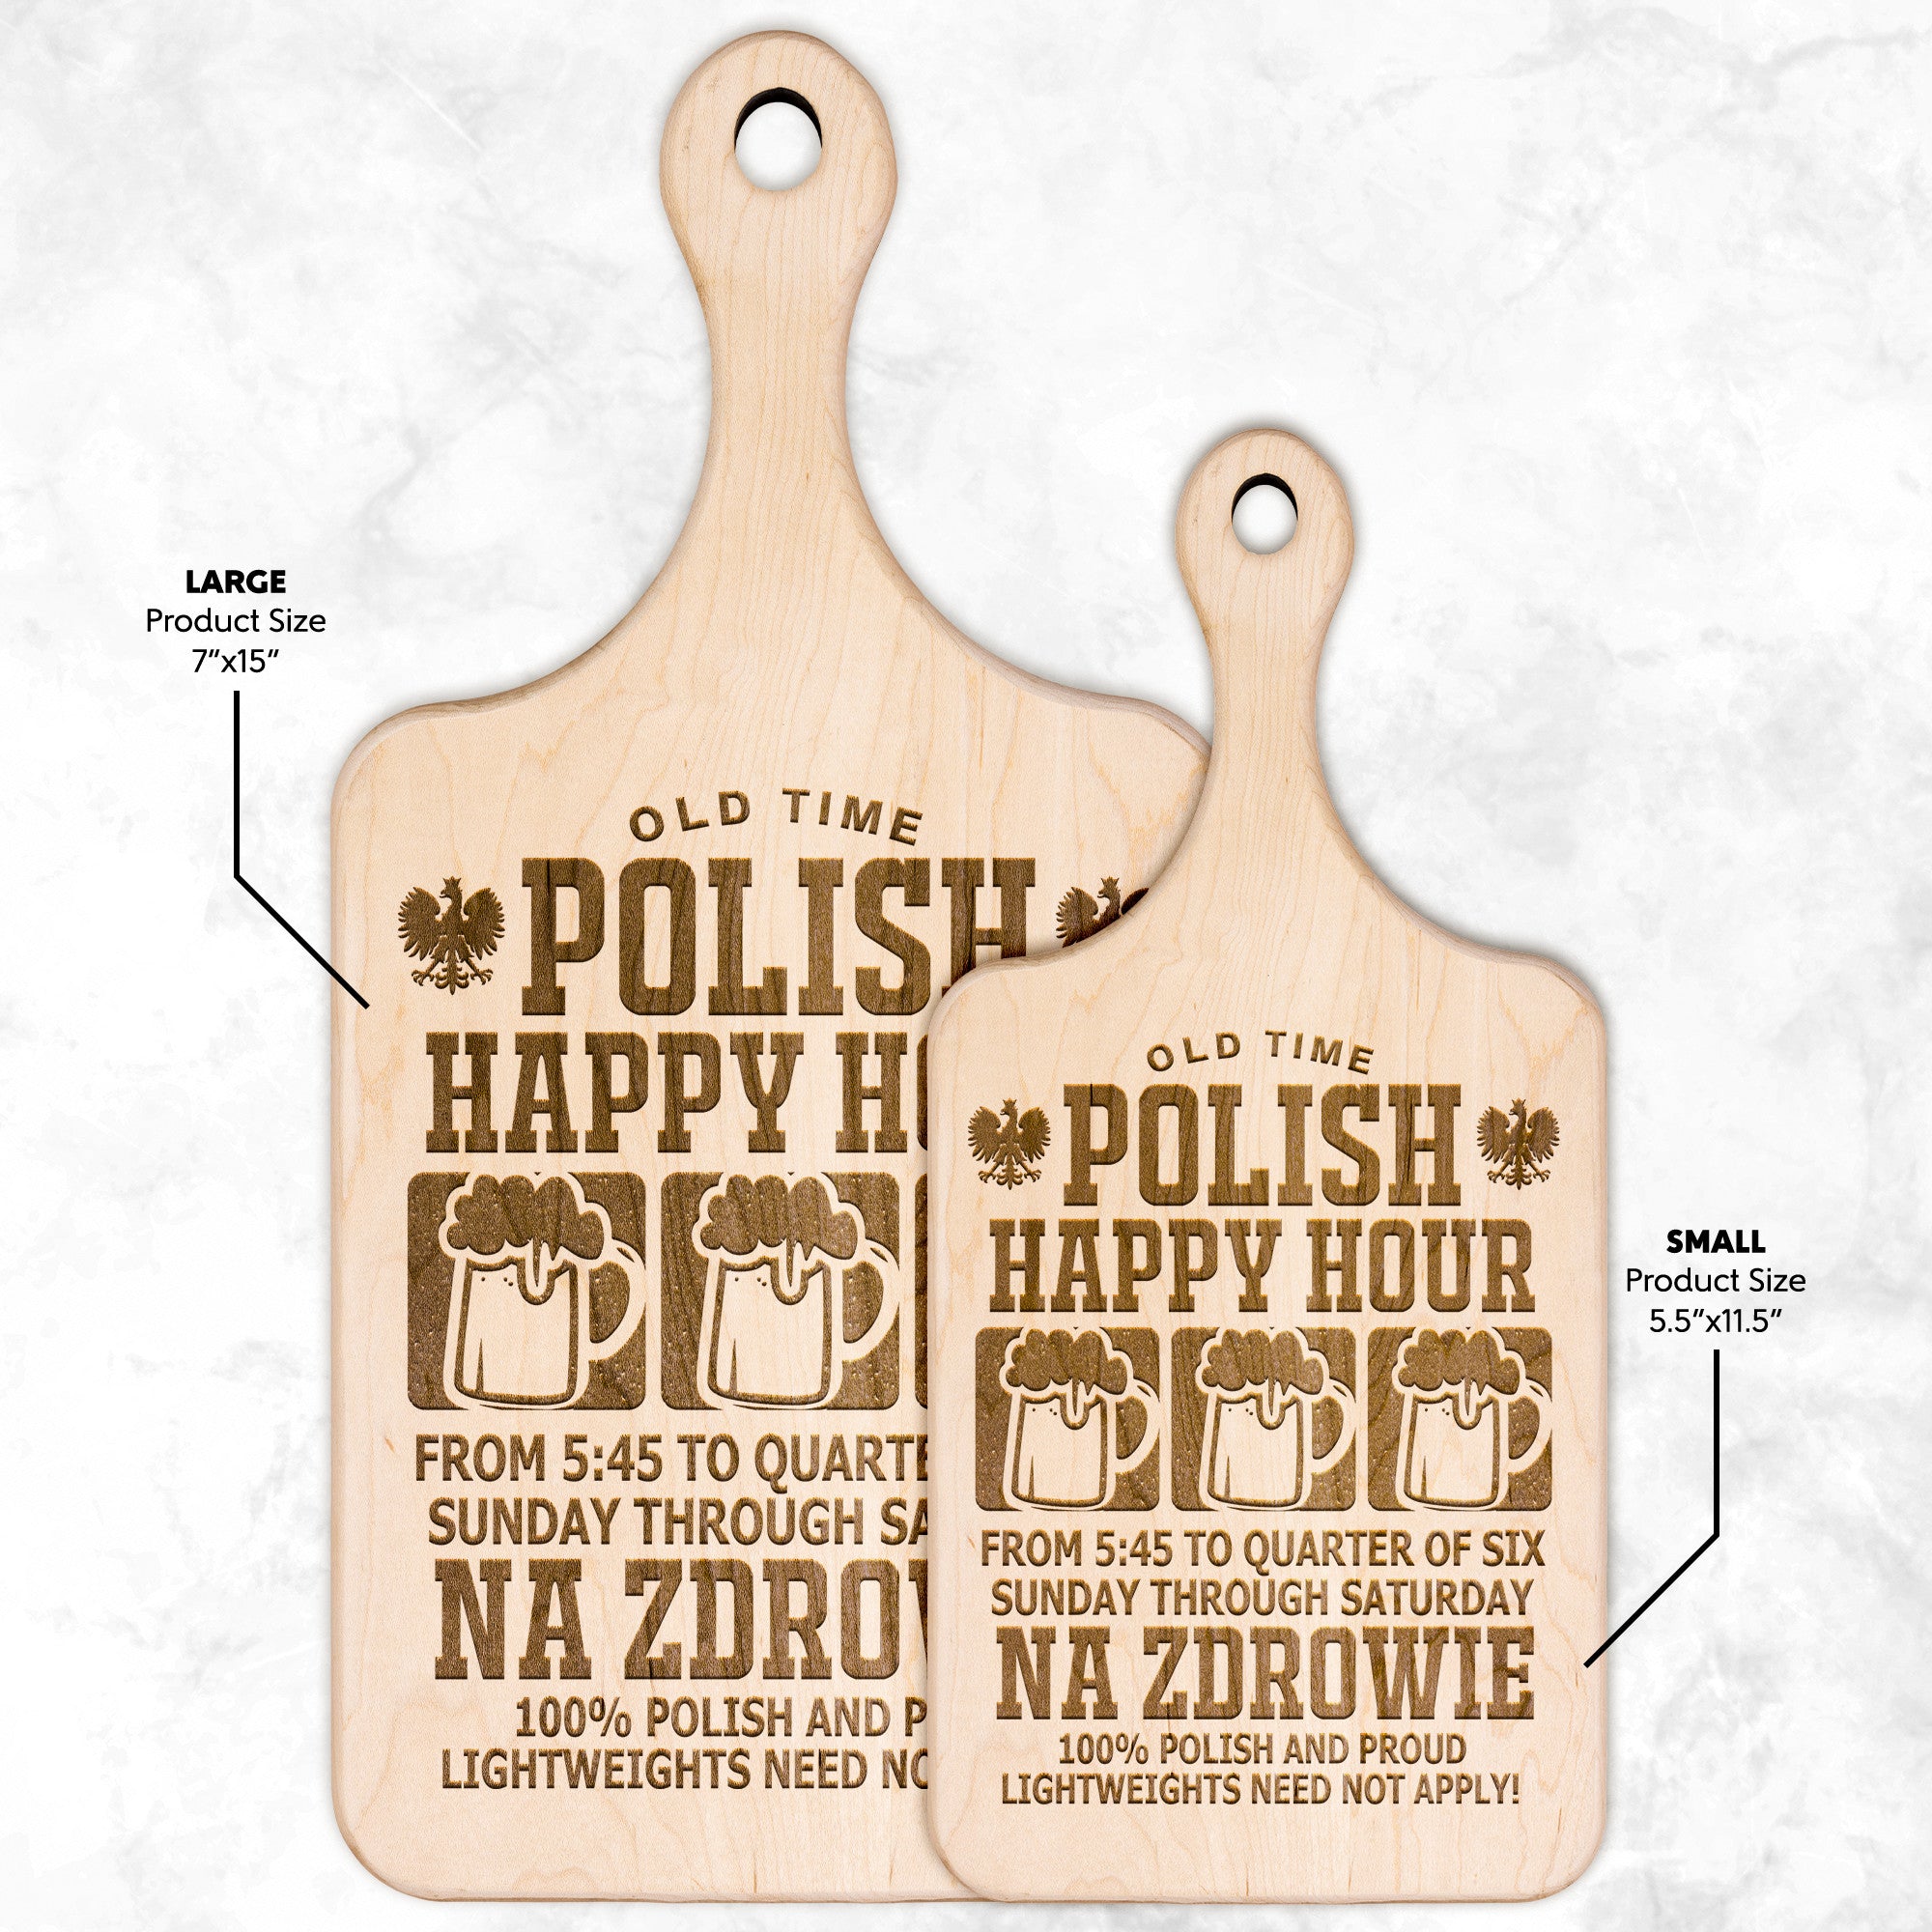 Old Time Polish Happy Hour Hardwood Paddle Cutting Board Kitchenware teelaunch Small Maple 